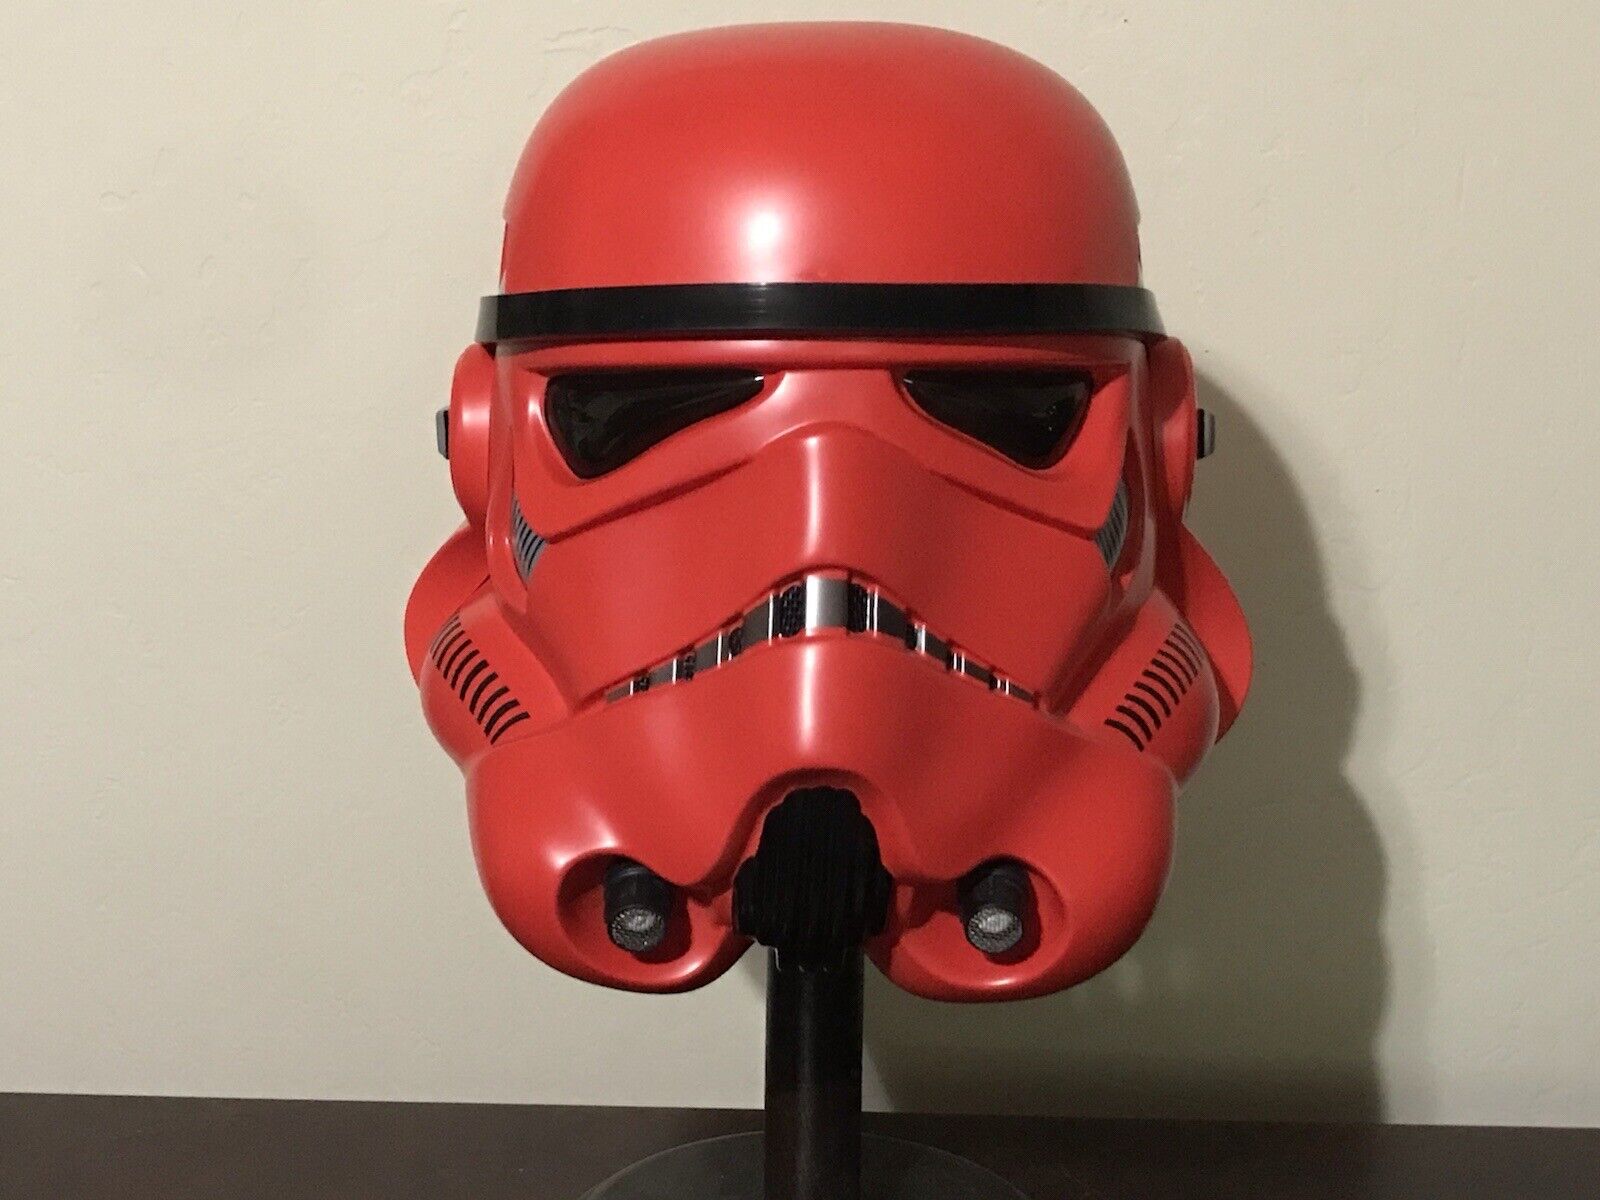 ANOVOS - CRIMSON STORMTROOPER HELMET - STAR WARS - OUT OF PRODUCTION - VERY RARE